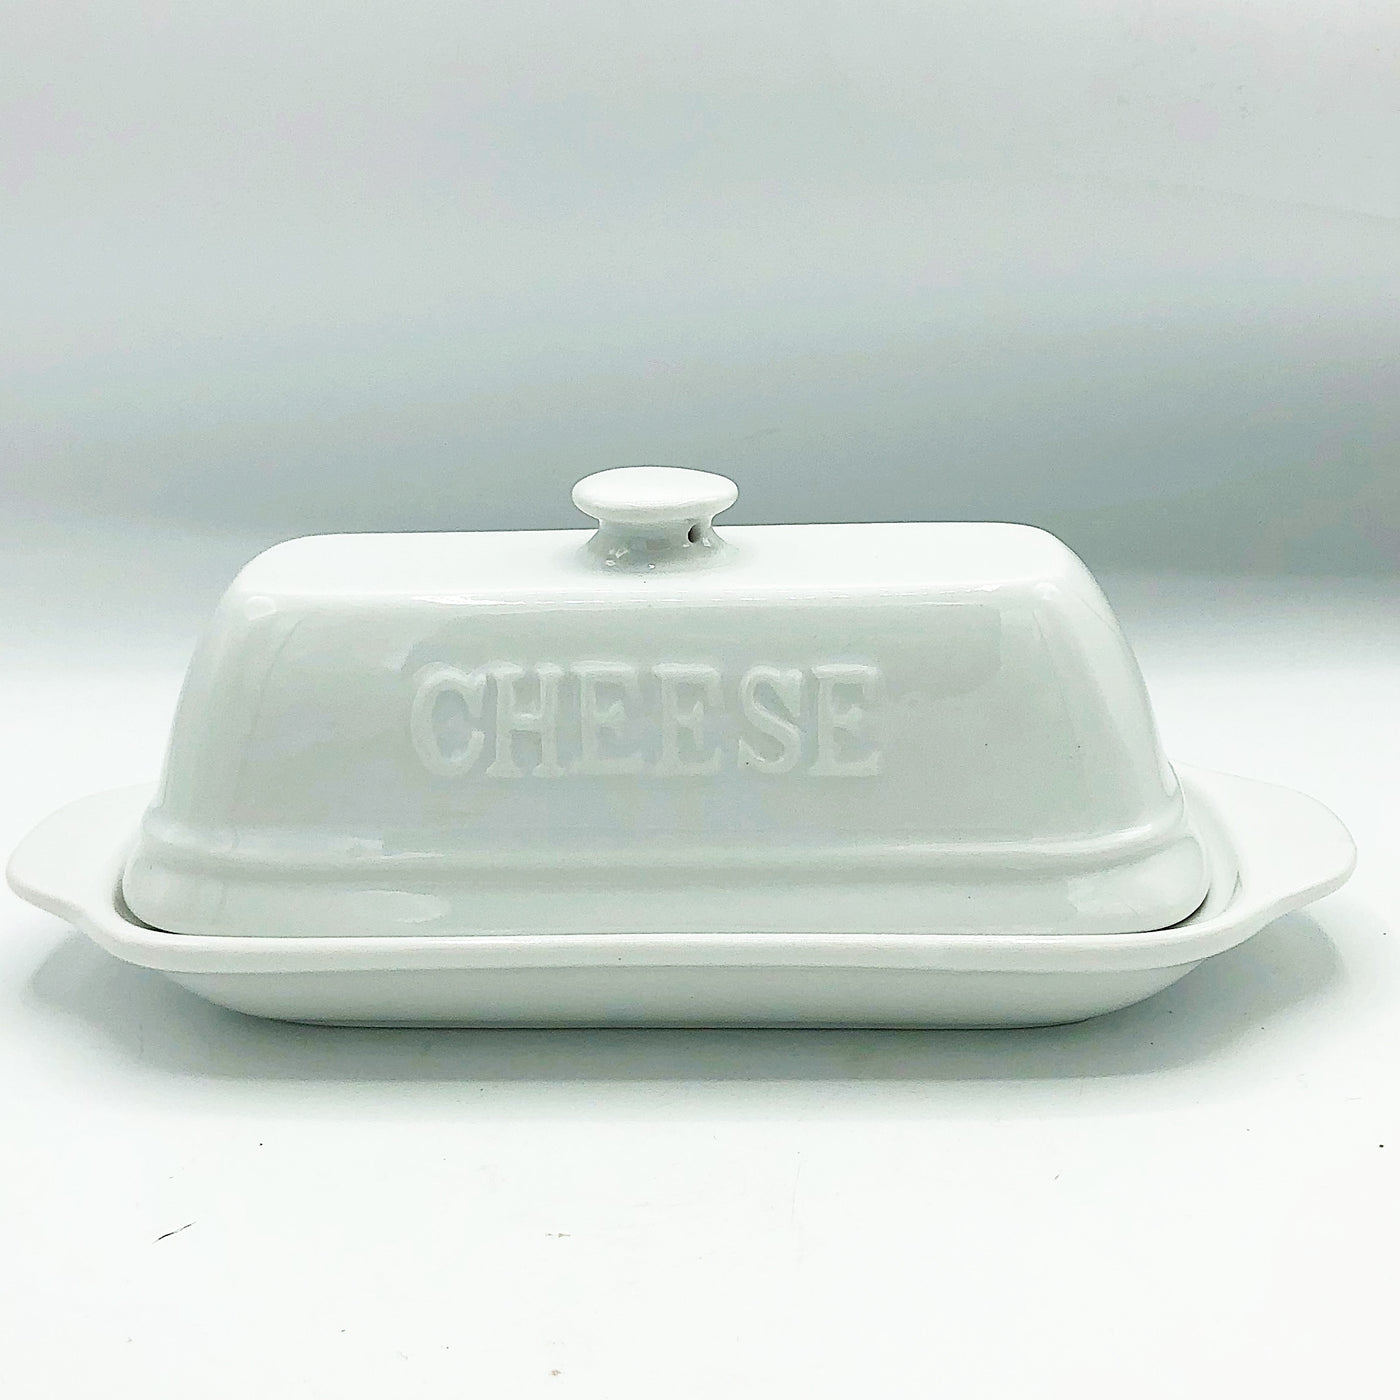 Surprise Me Sale 🤭 Gourmet Village Covered White Cheese Fromage Dish